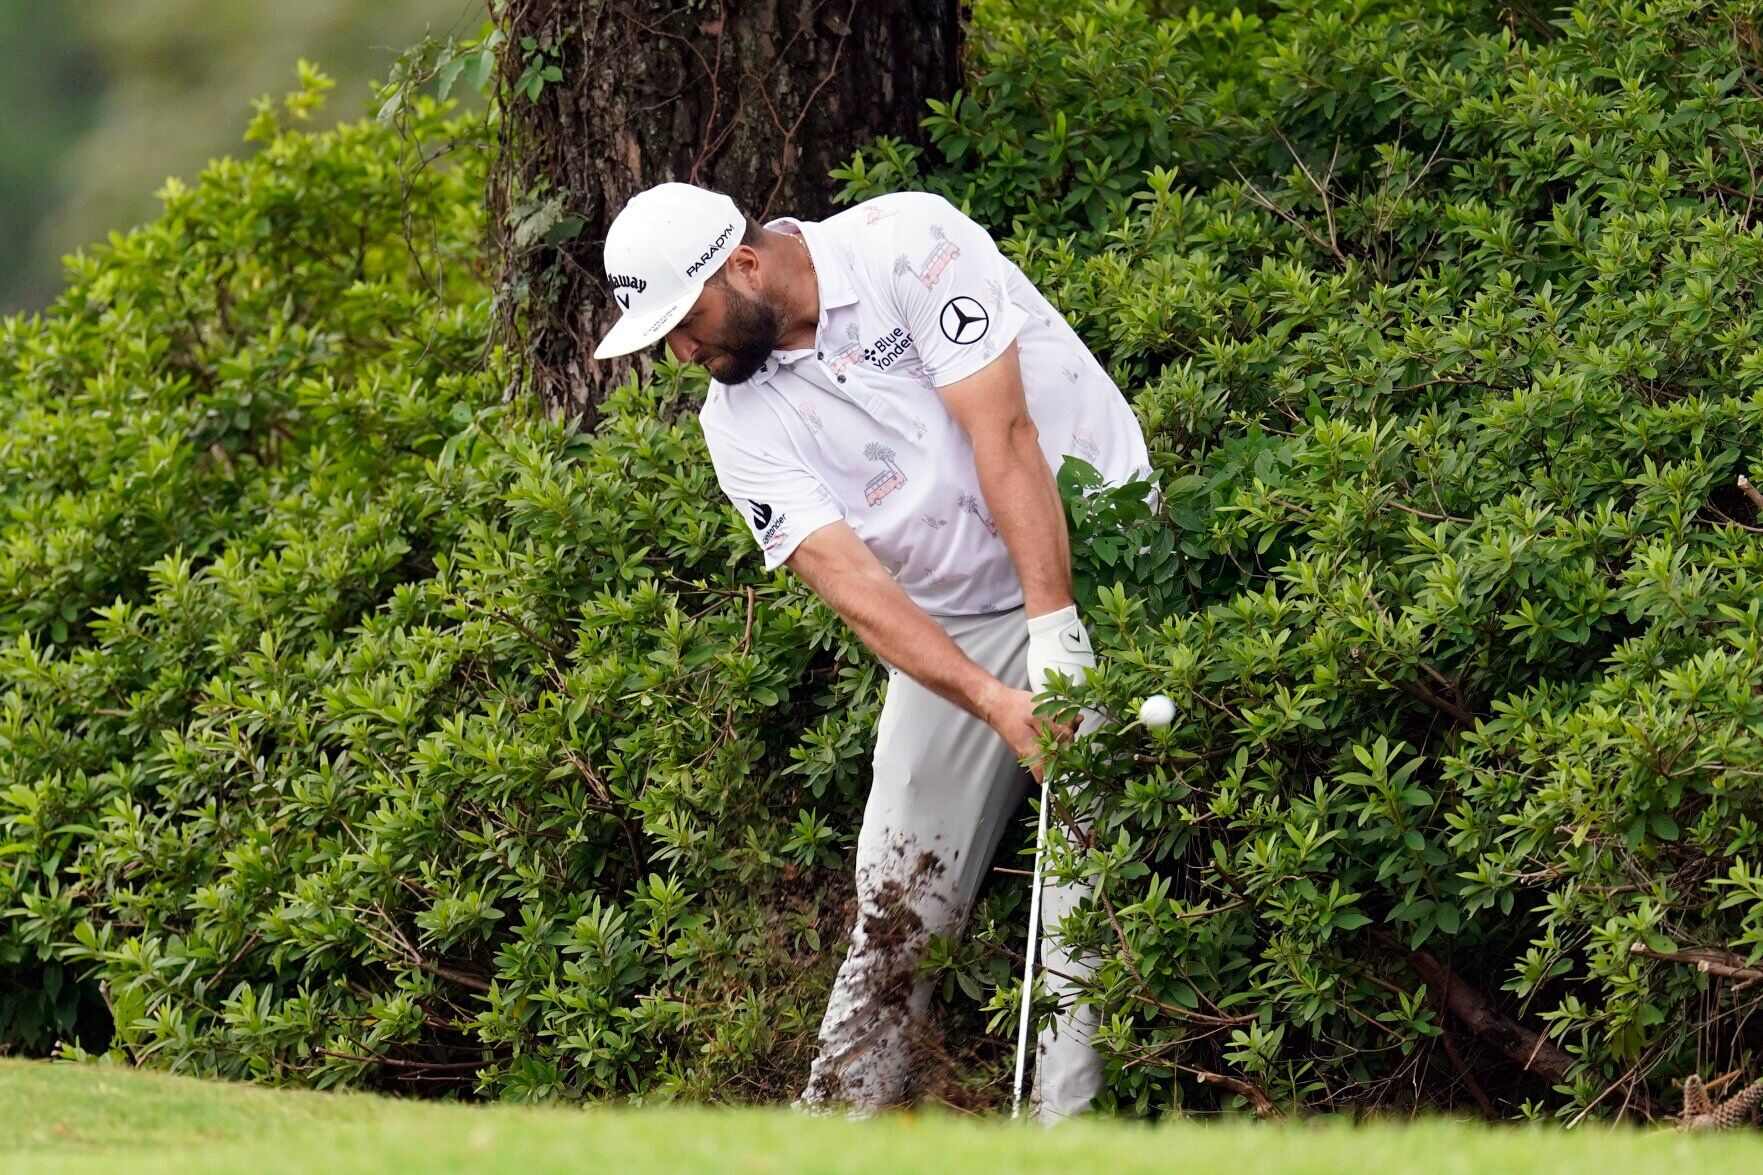 Spieth keeps a clean card in the mud to lead playoff opener